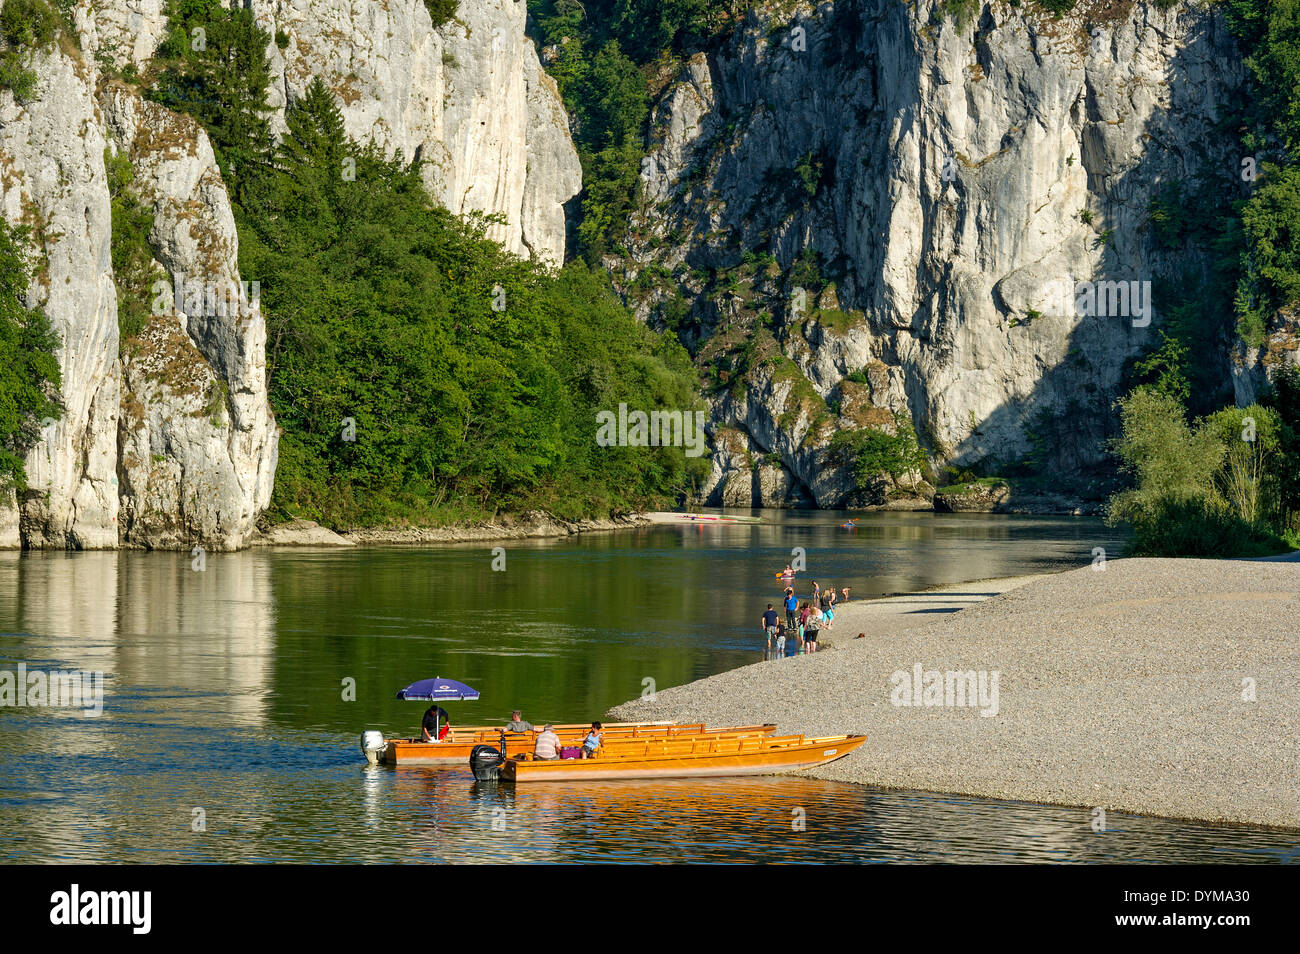 Ferry boats for crossing the Danube River at the Danube Gorge, Kelheim, Lower Bavaria, Bavaria, Germany Stock Photo